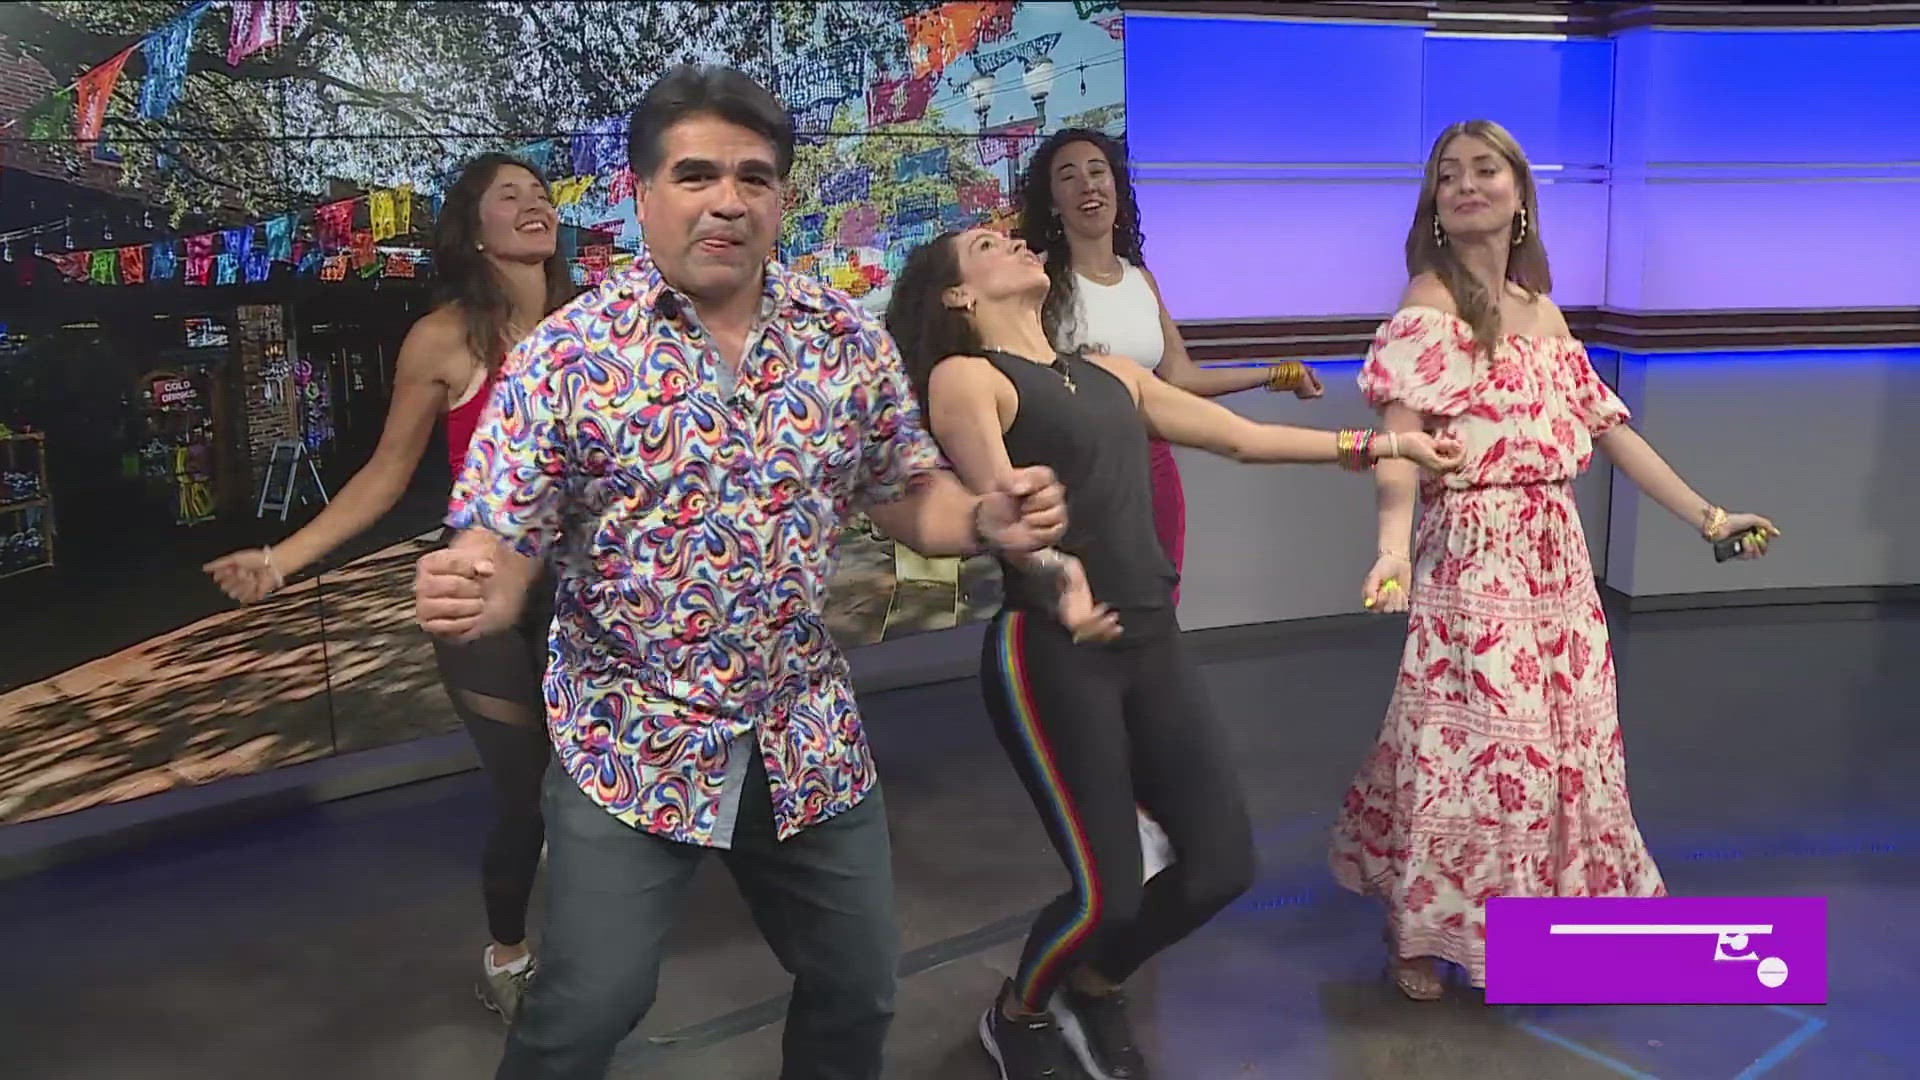 Zumba/Fitness Instructor Davida LaHood brings the moves in-studio to burn off some of those Fiesta calories.